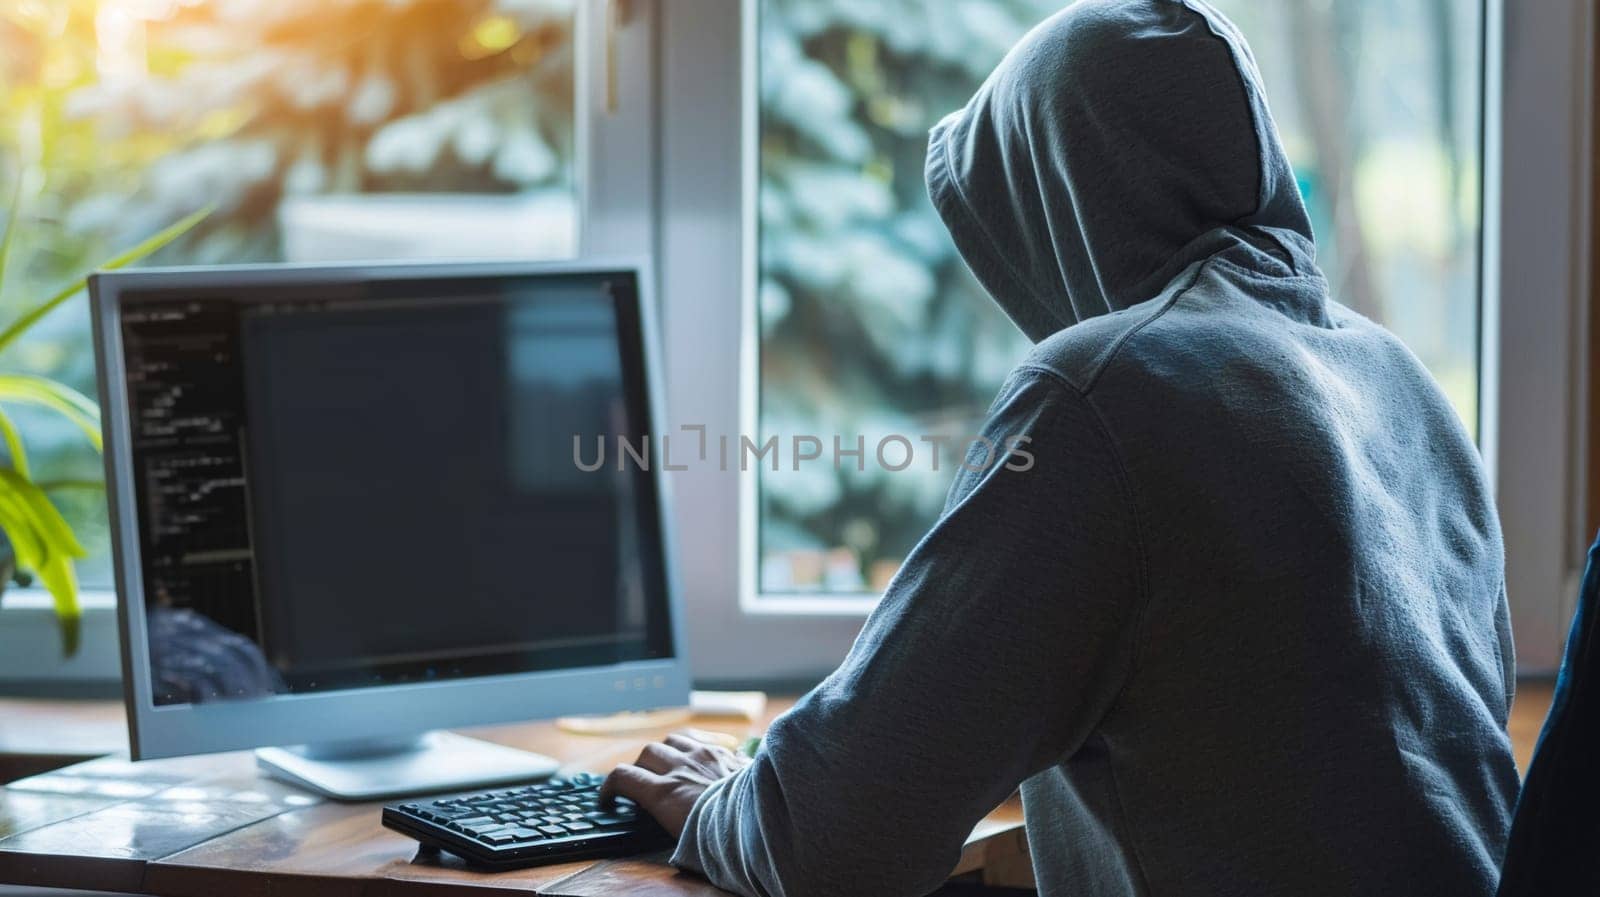 Hooded figure engages in cyber crime seated before computer screen in dark, secretive indoor environment